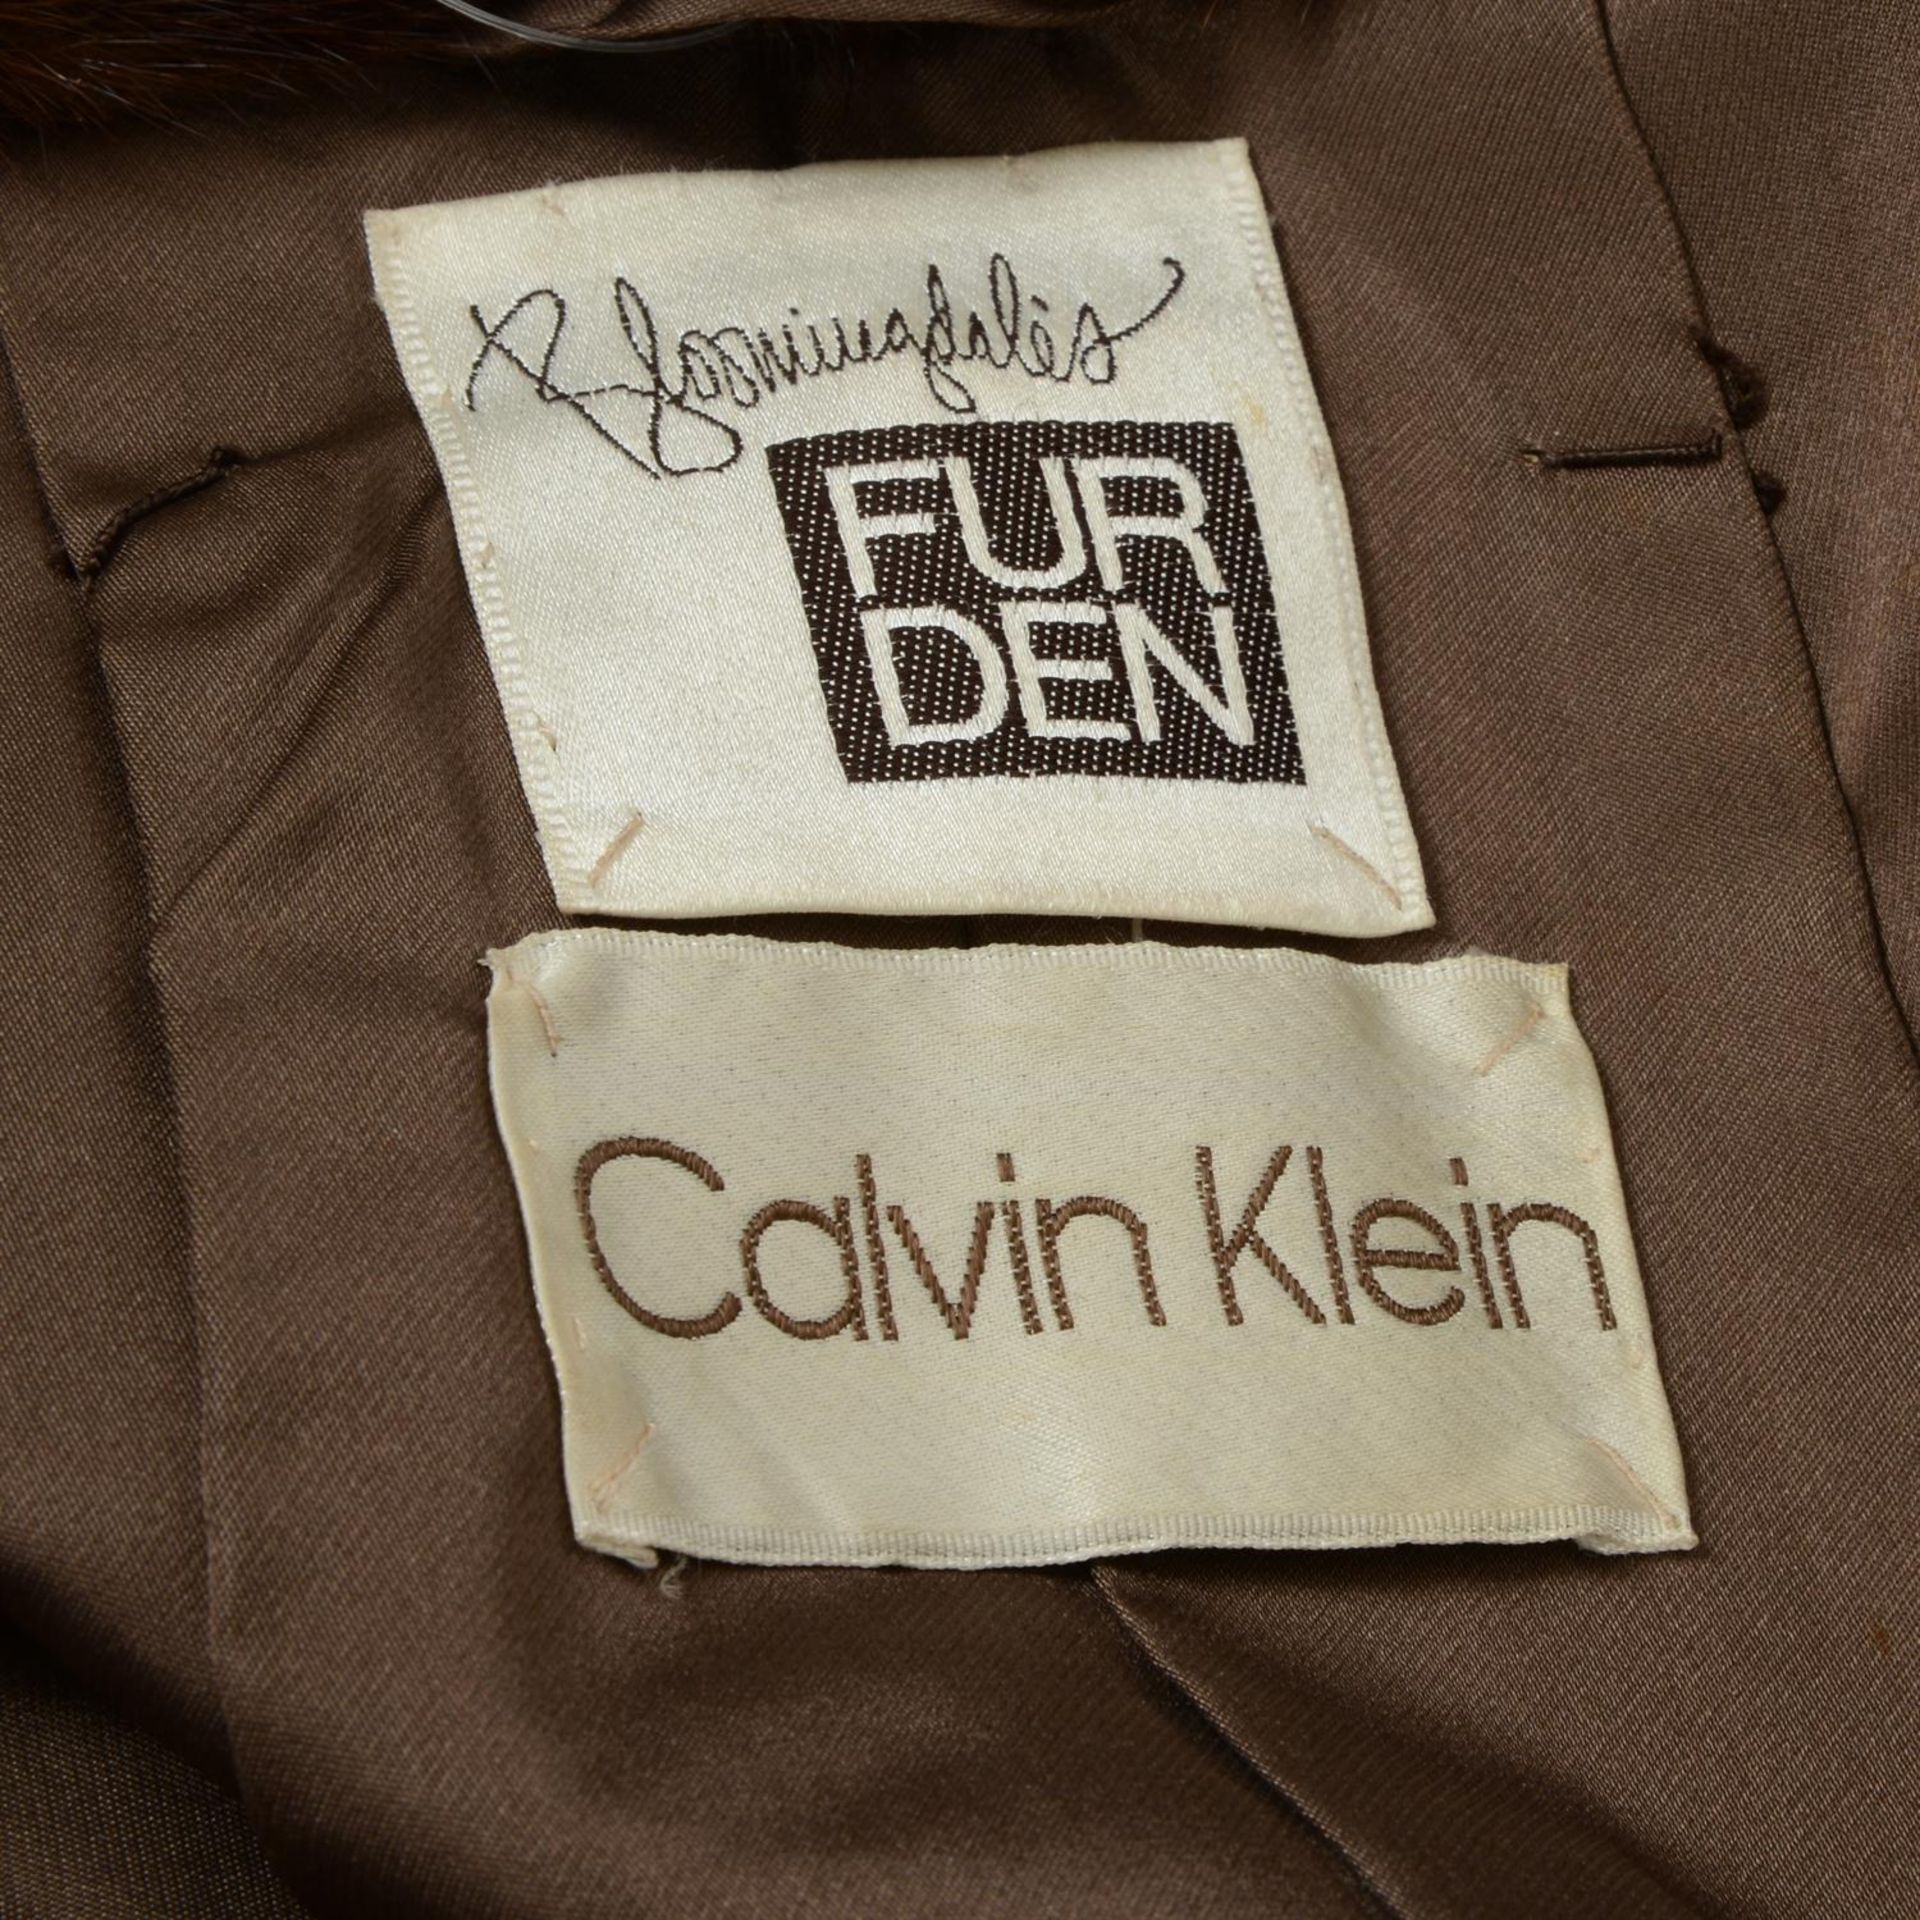 CALVIN KLEIN - a double breasted mink jacket. - Image 3 of 3